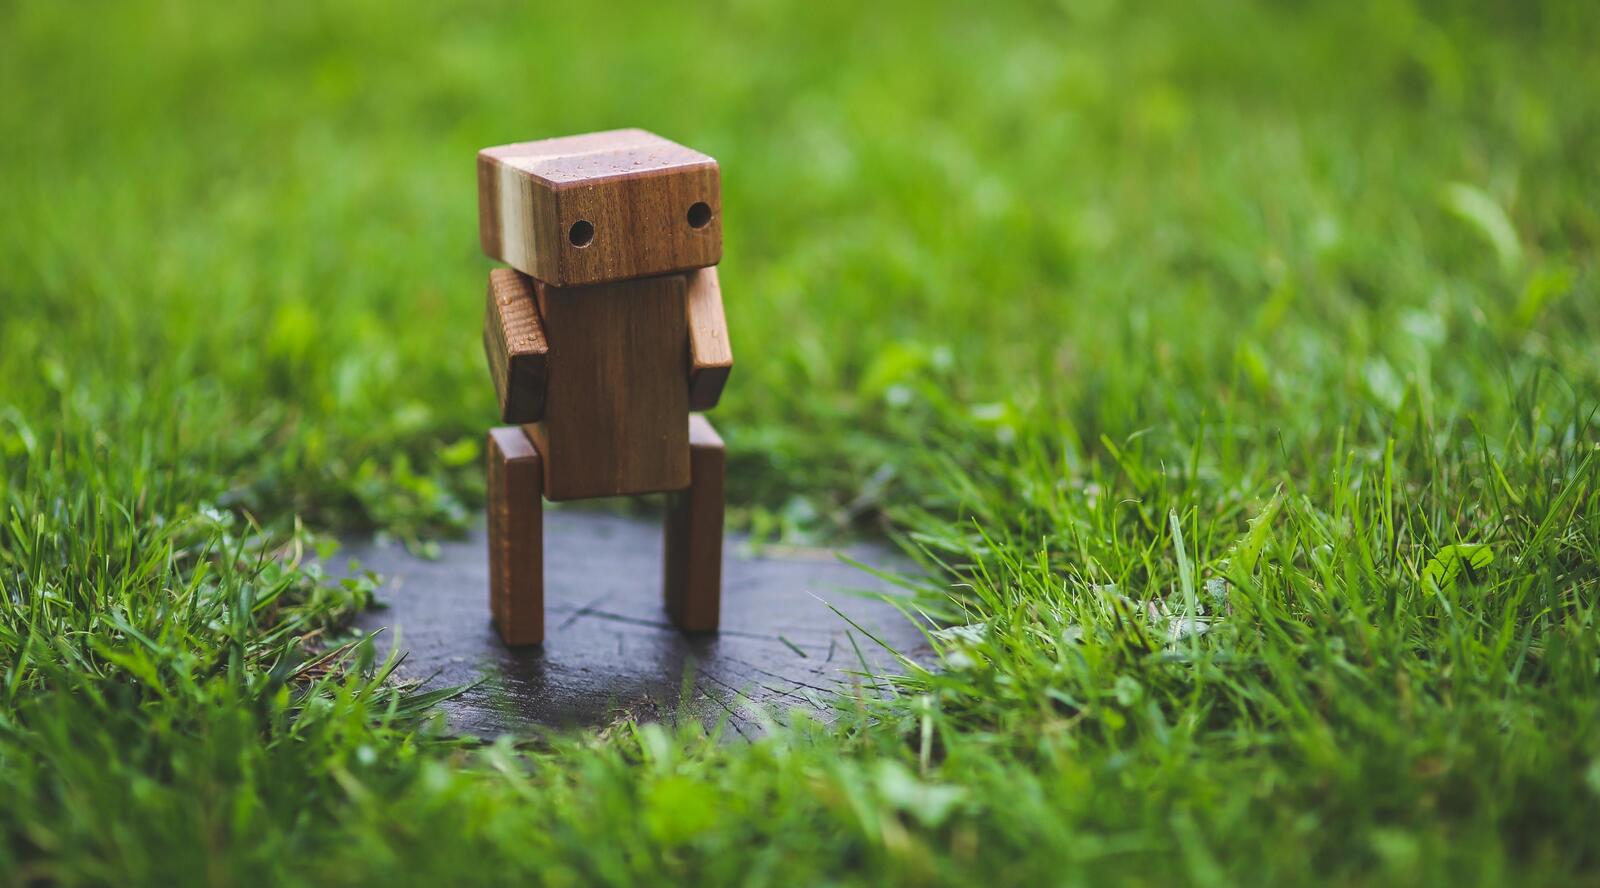 Free photo A small robot made of wood stands on a green lawn